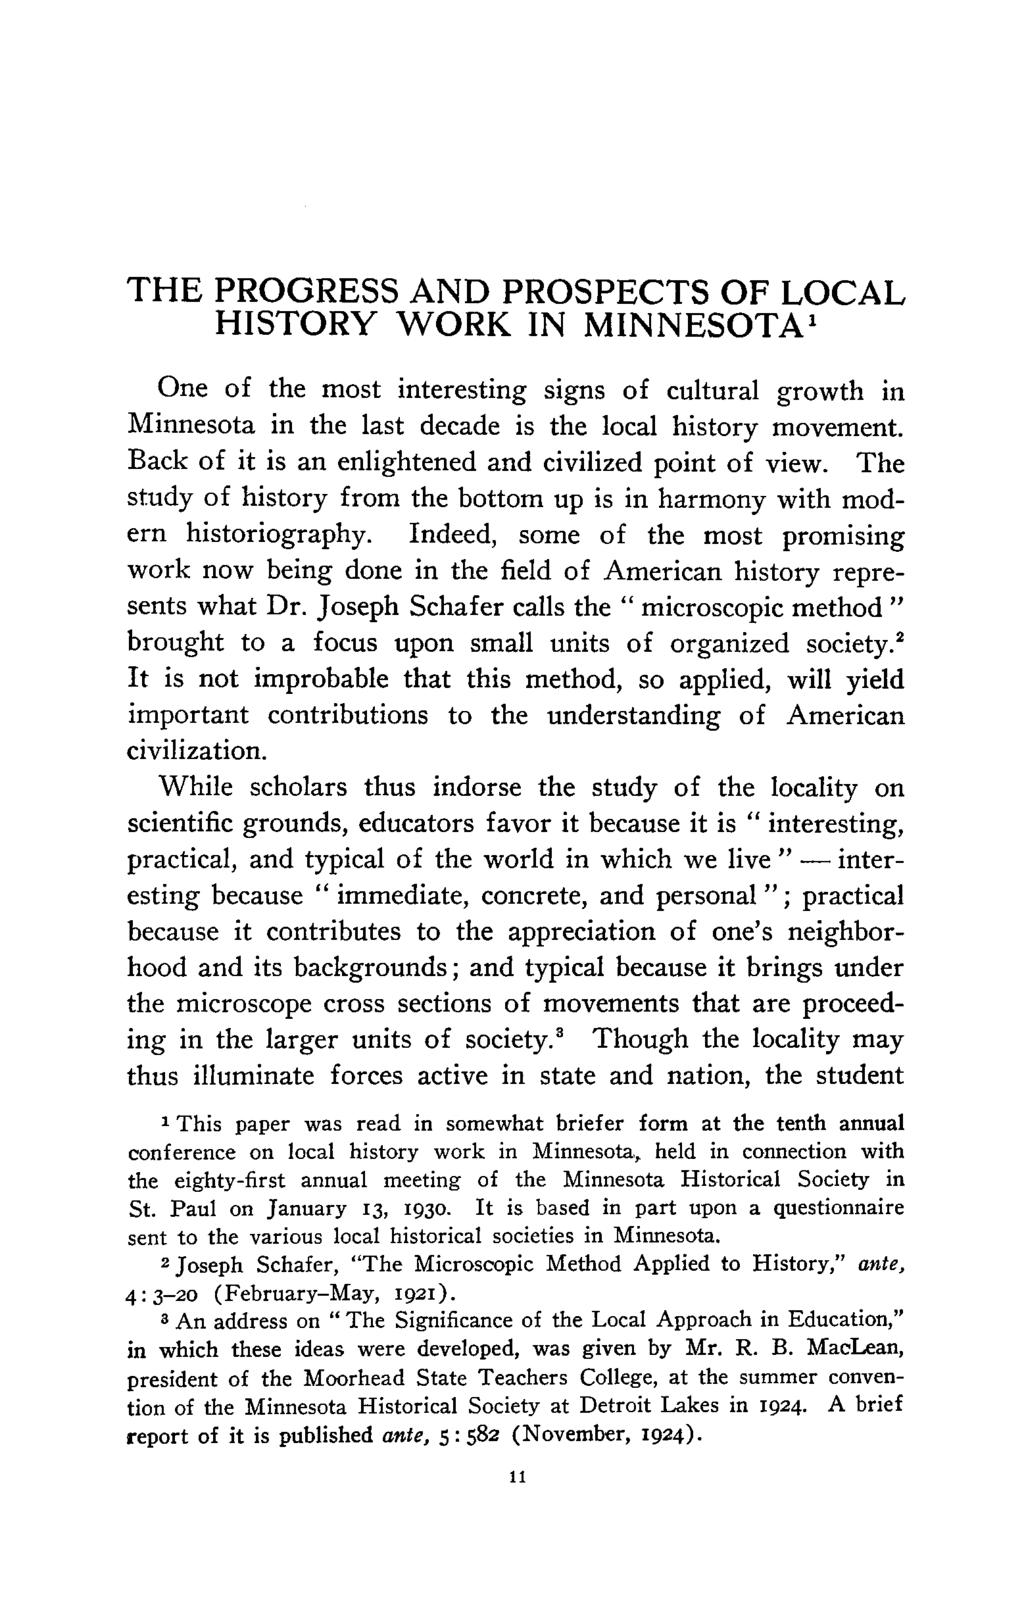 THE PROGRESS AND PROSPECTS OF LOCAL HISTORY W^ORK IN MINNESOTA^ One of the most interesting signs of cultural growth in Minnesota in the last decade is the local history movement.